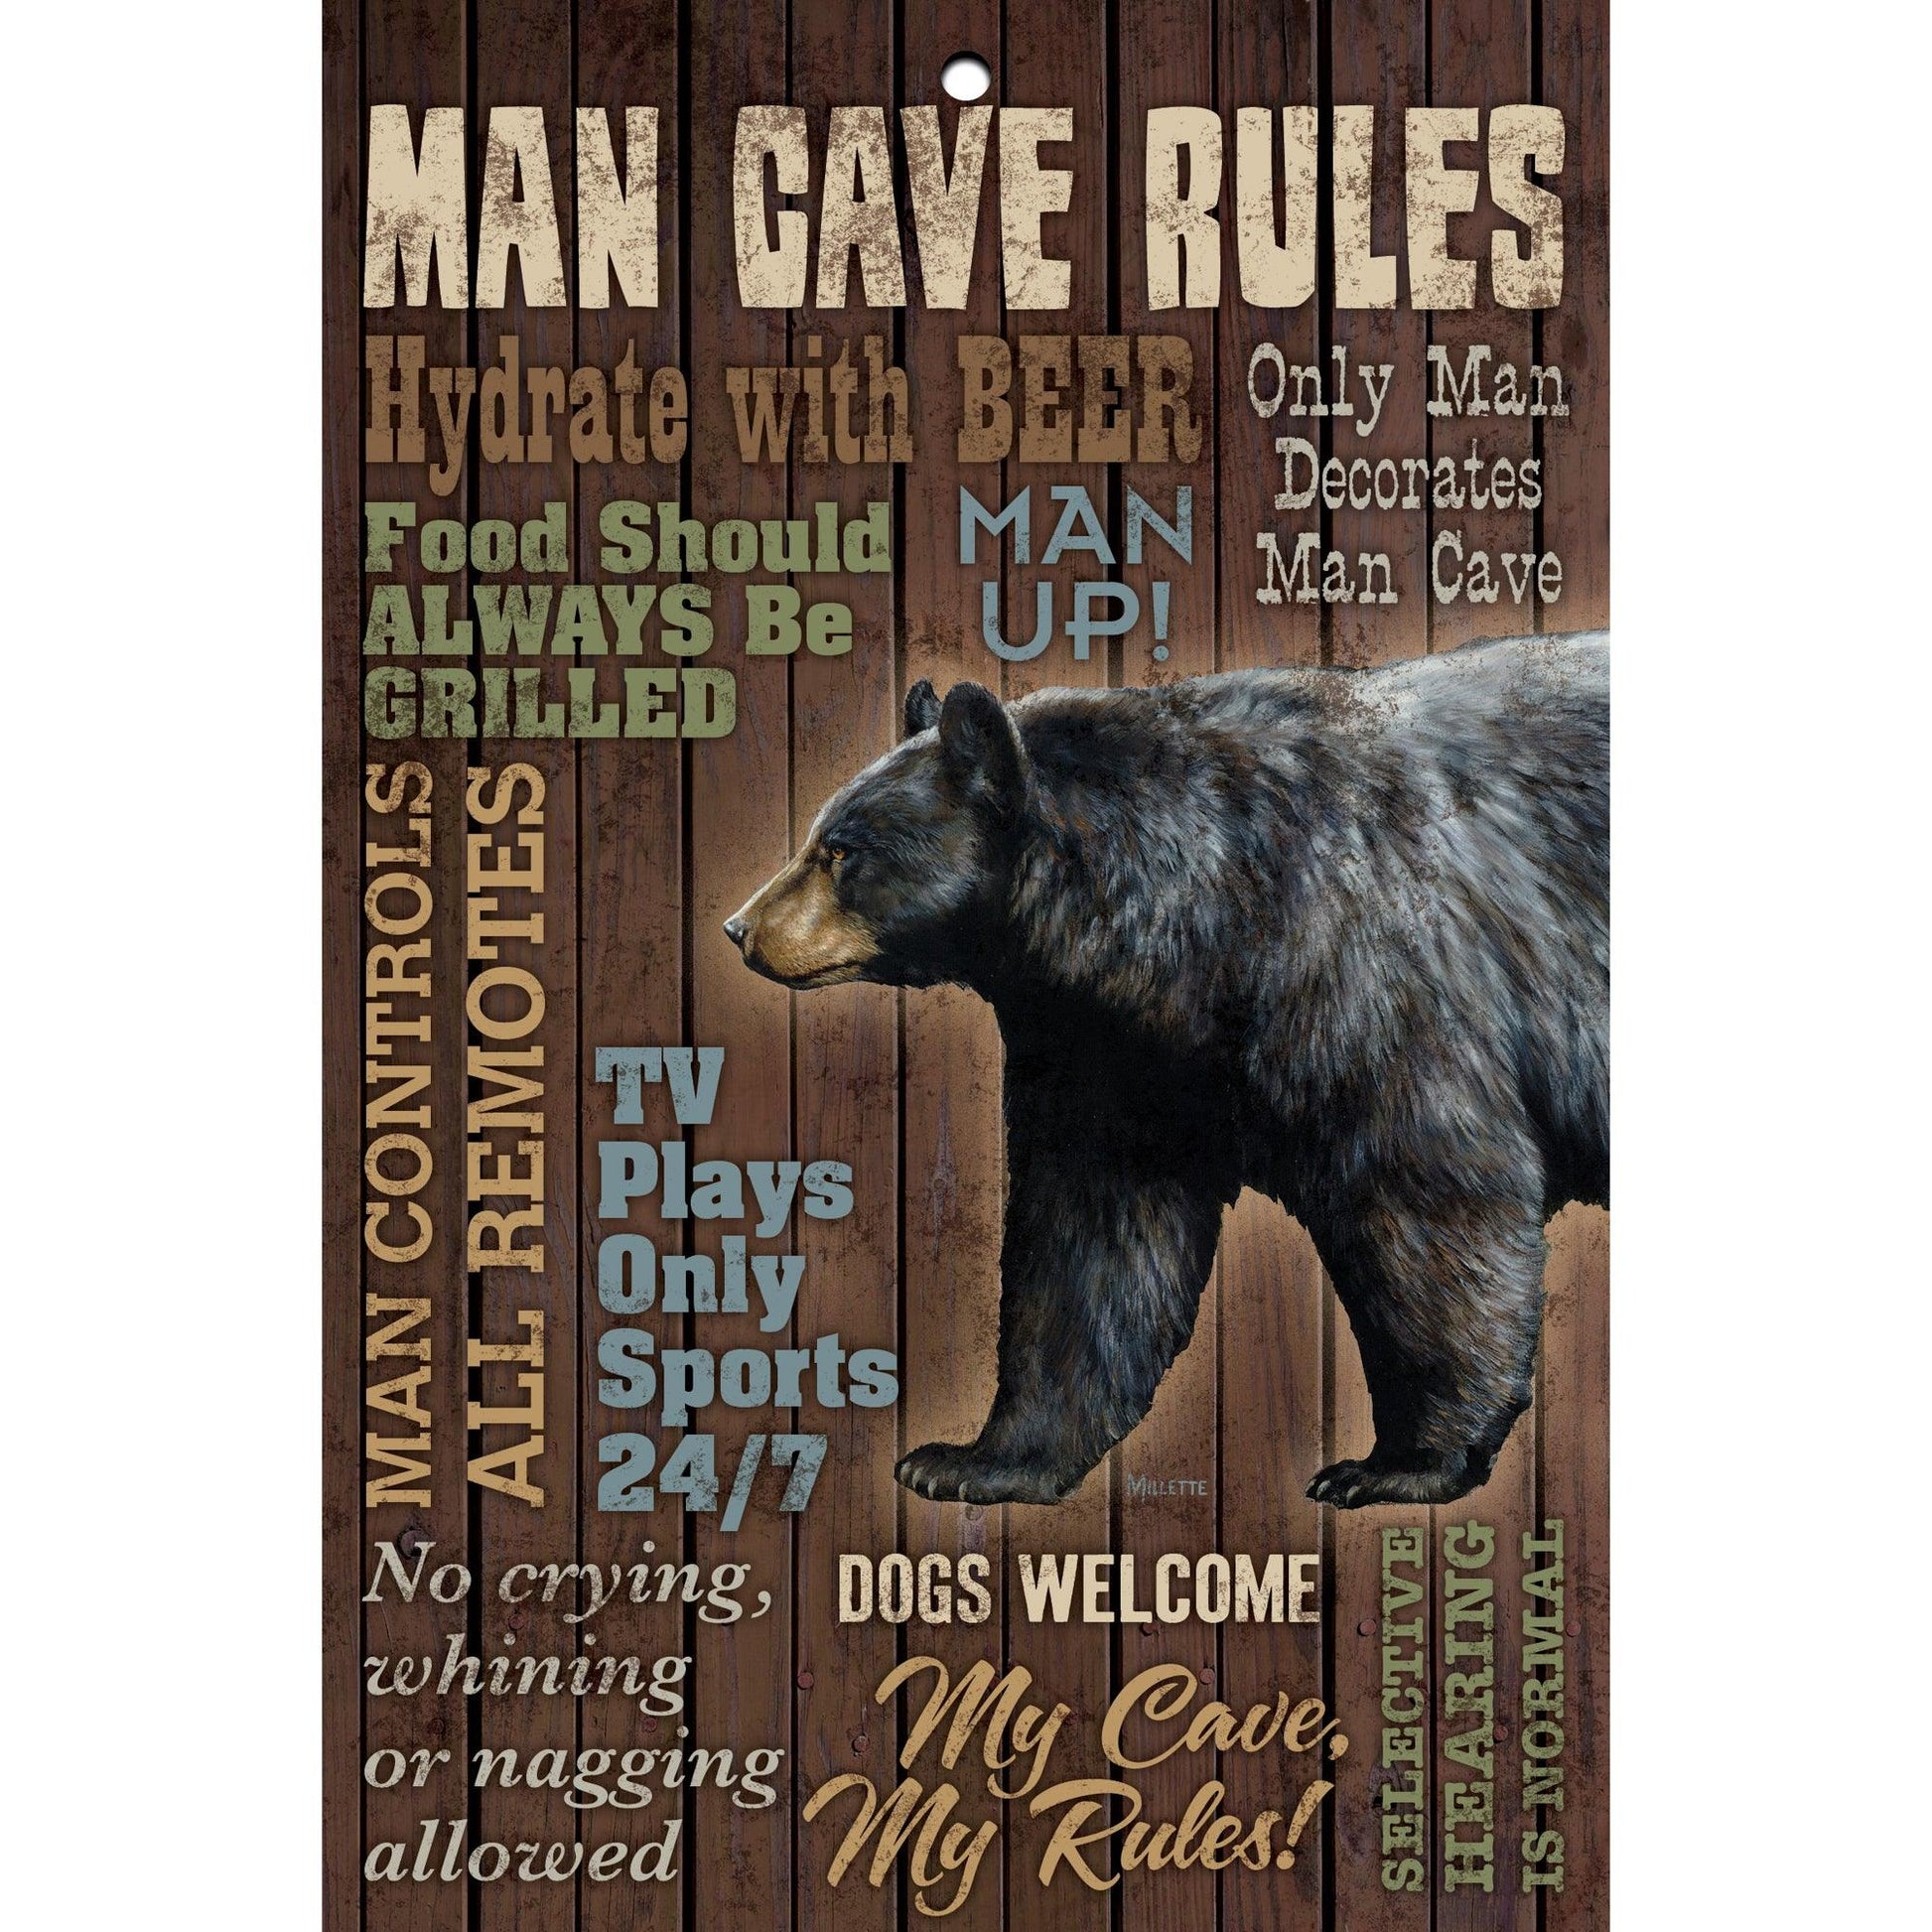 Man Cave Rules 8" x 12" Wood Sign - Wild Wings